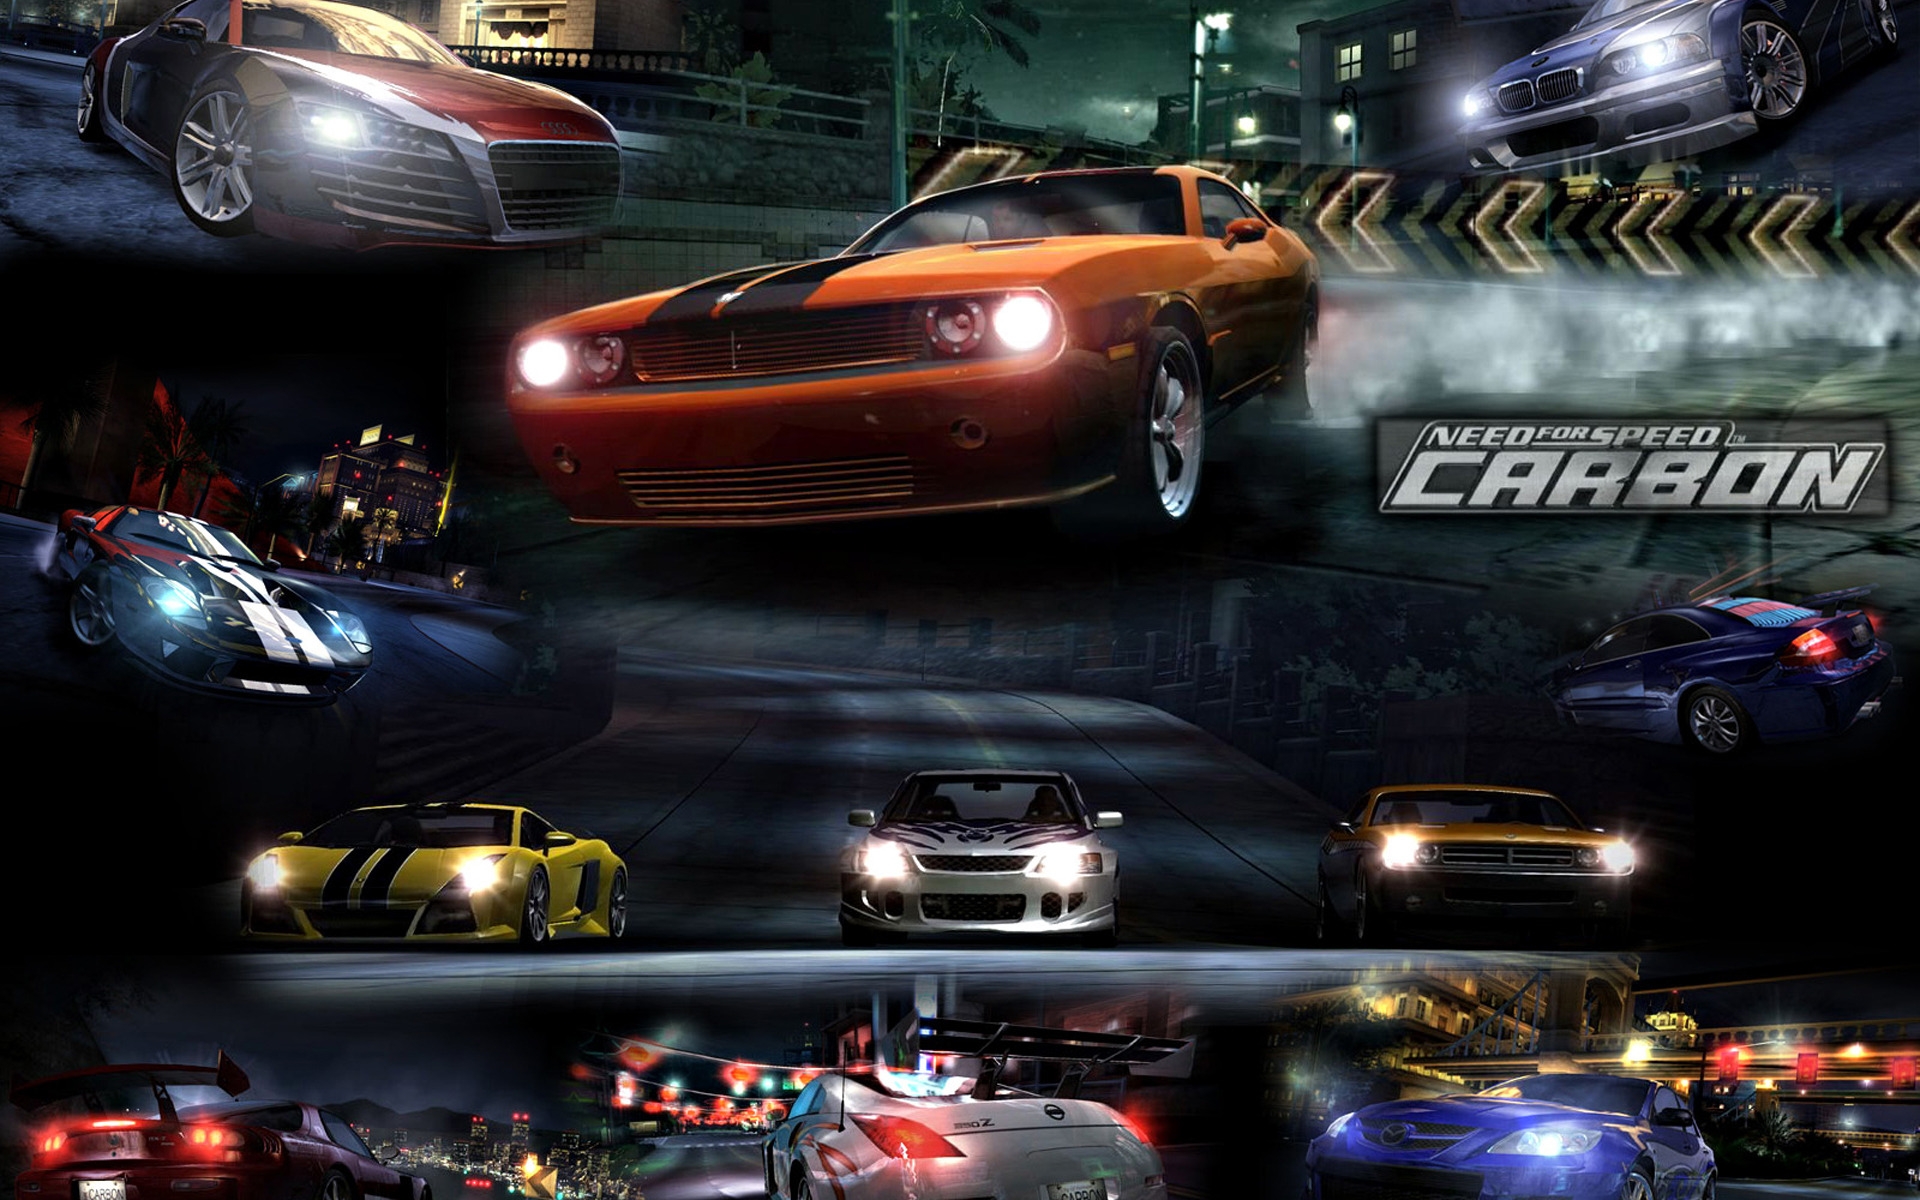 NFS Carbon for 1920 x 1200 widescreen resolution